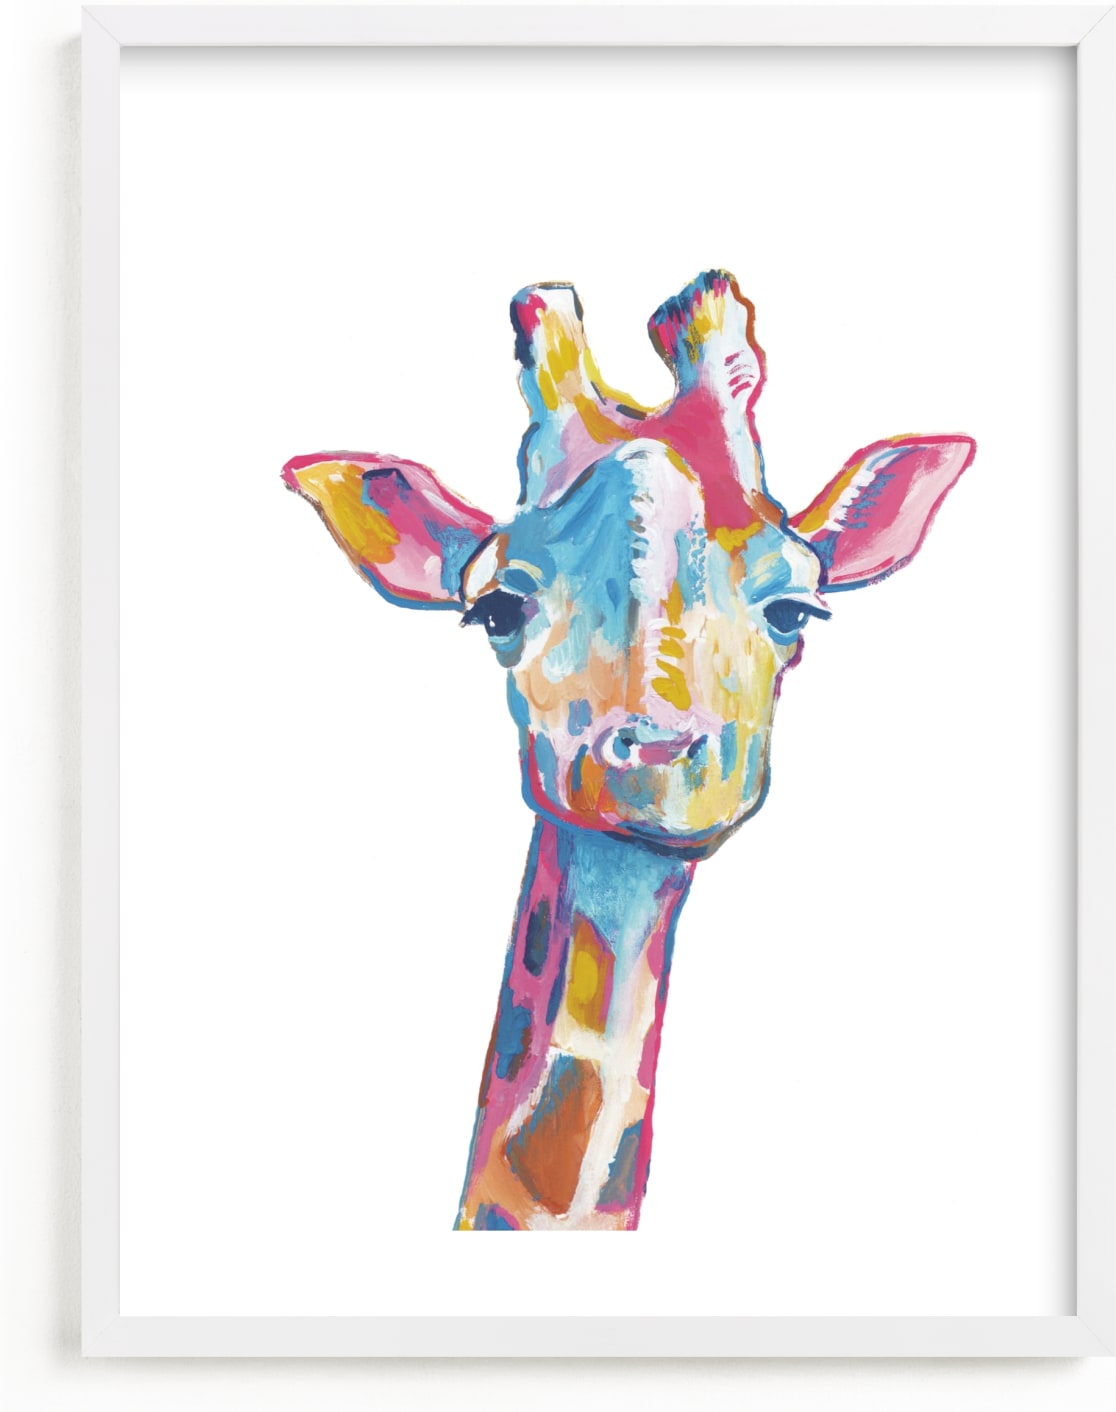 This is a colorful art by Makewells called Mr. Giraffe.